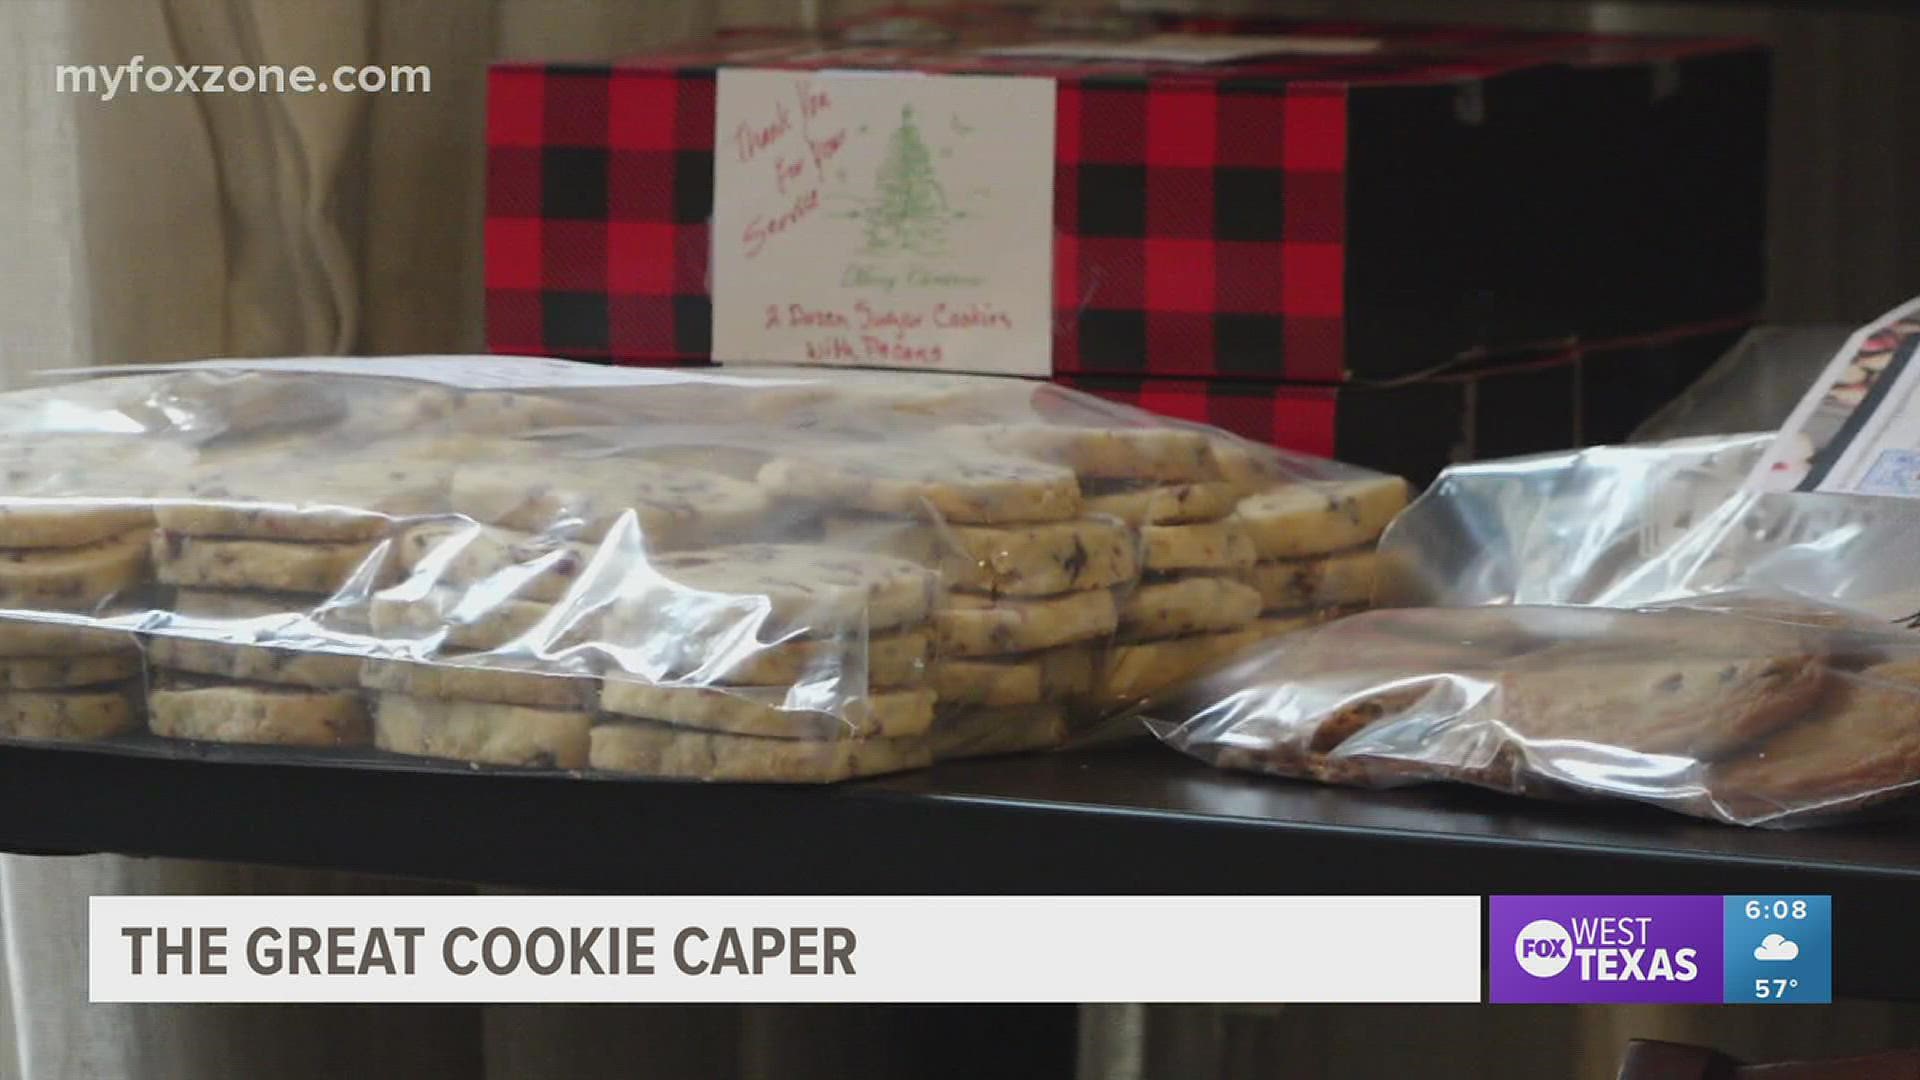 The Great Cookie Caper event will be from December 1-6.